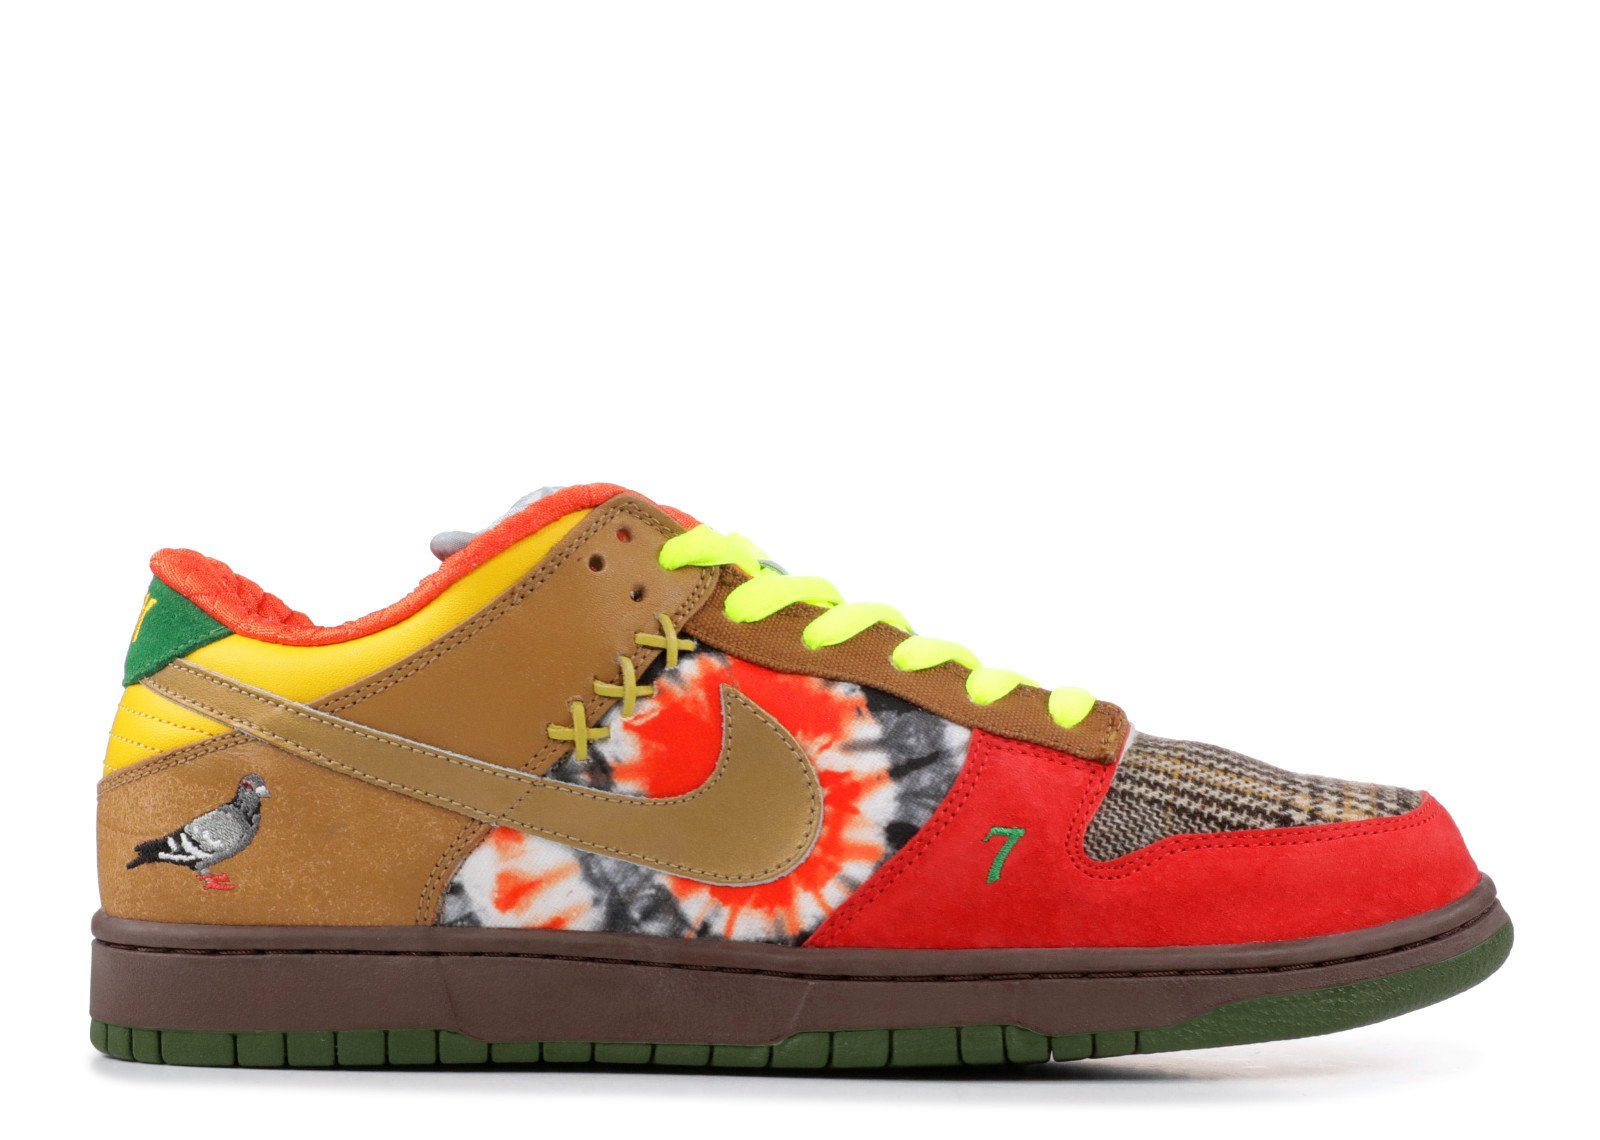 Nike SB Dunk Low "What The Dunk"